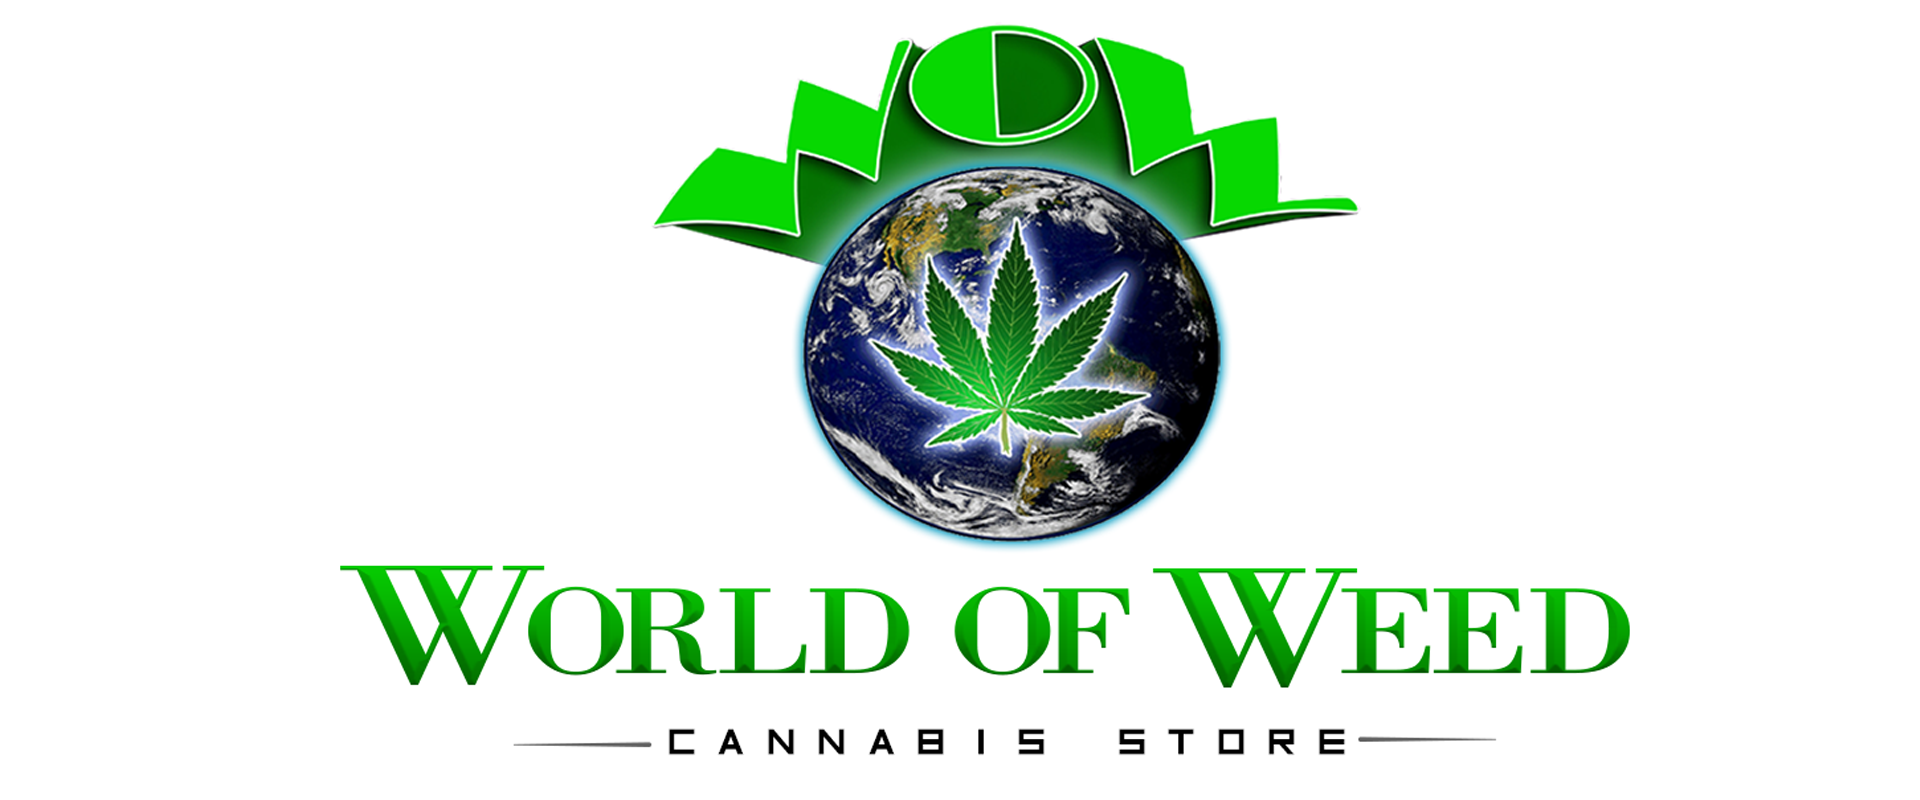 wow world of weed